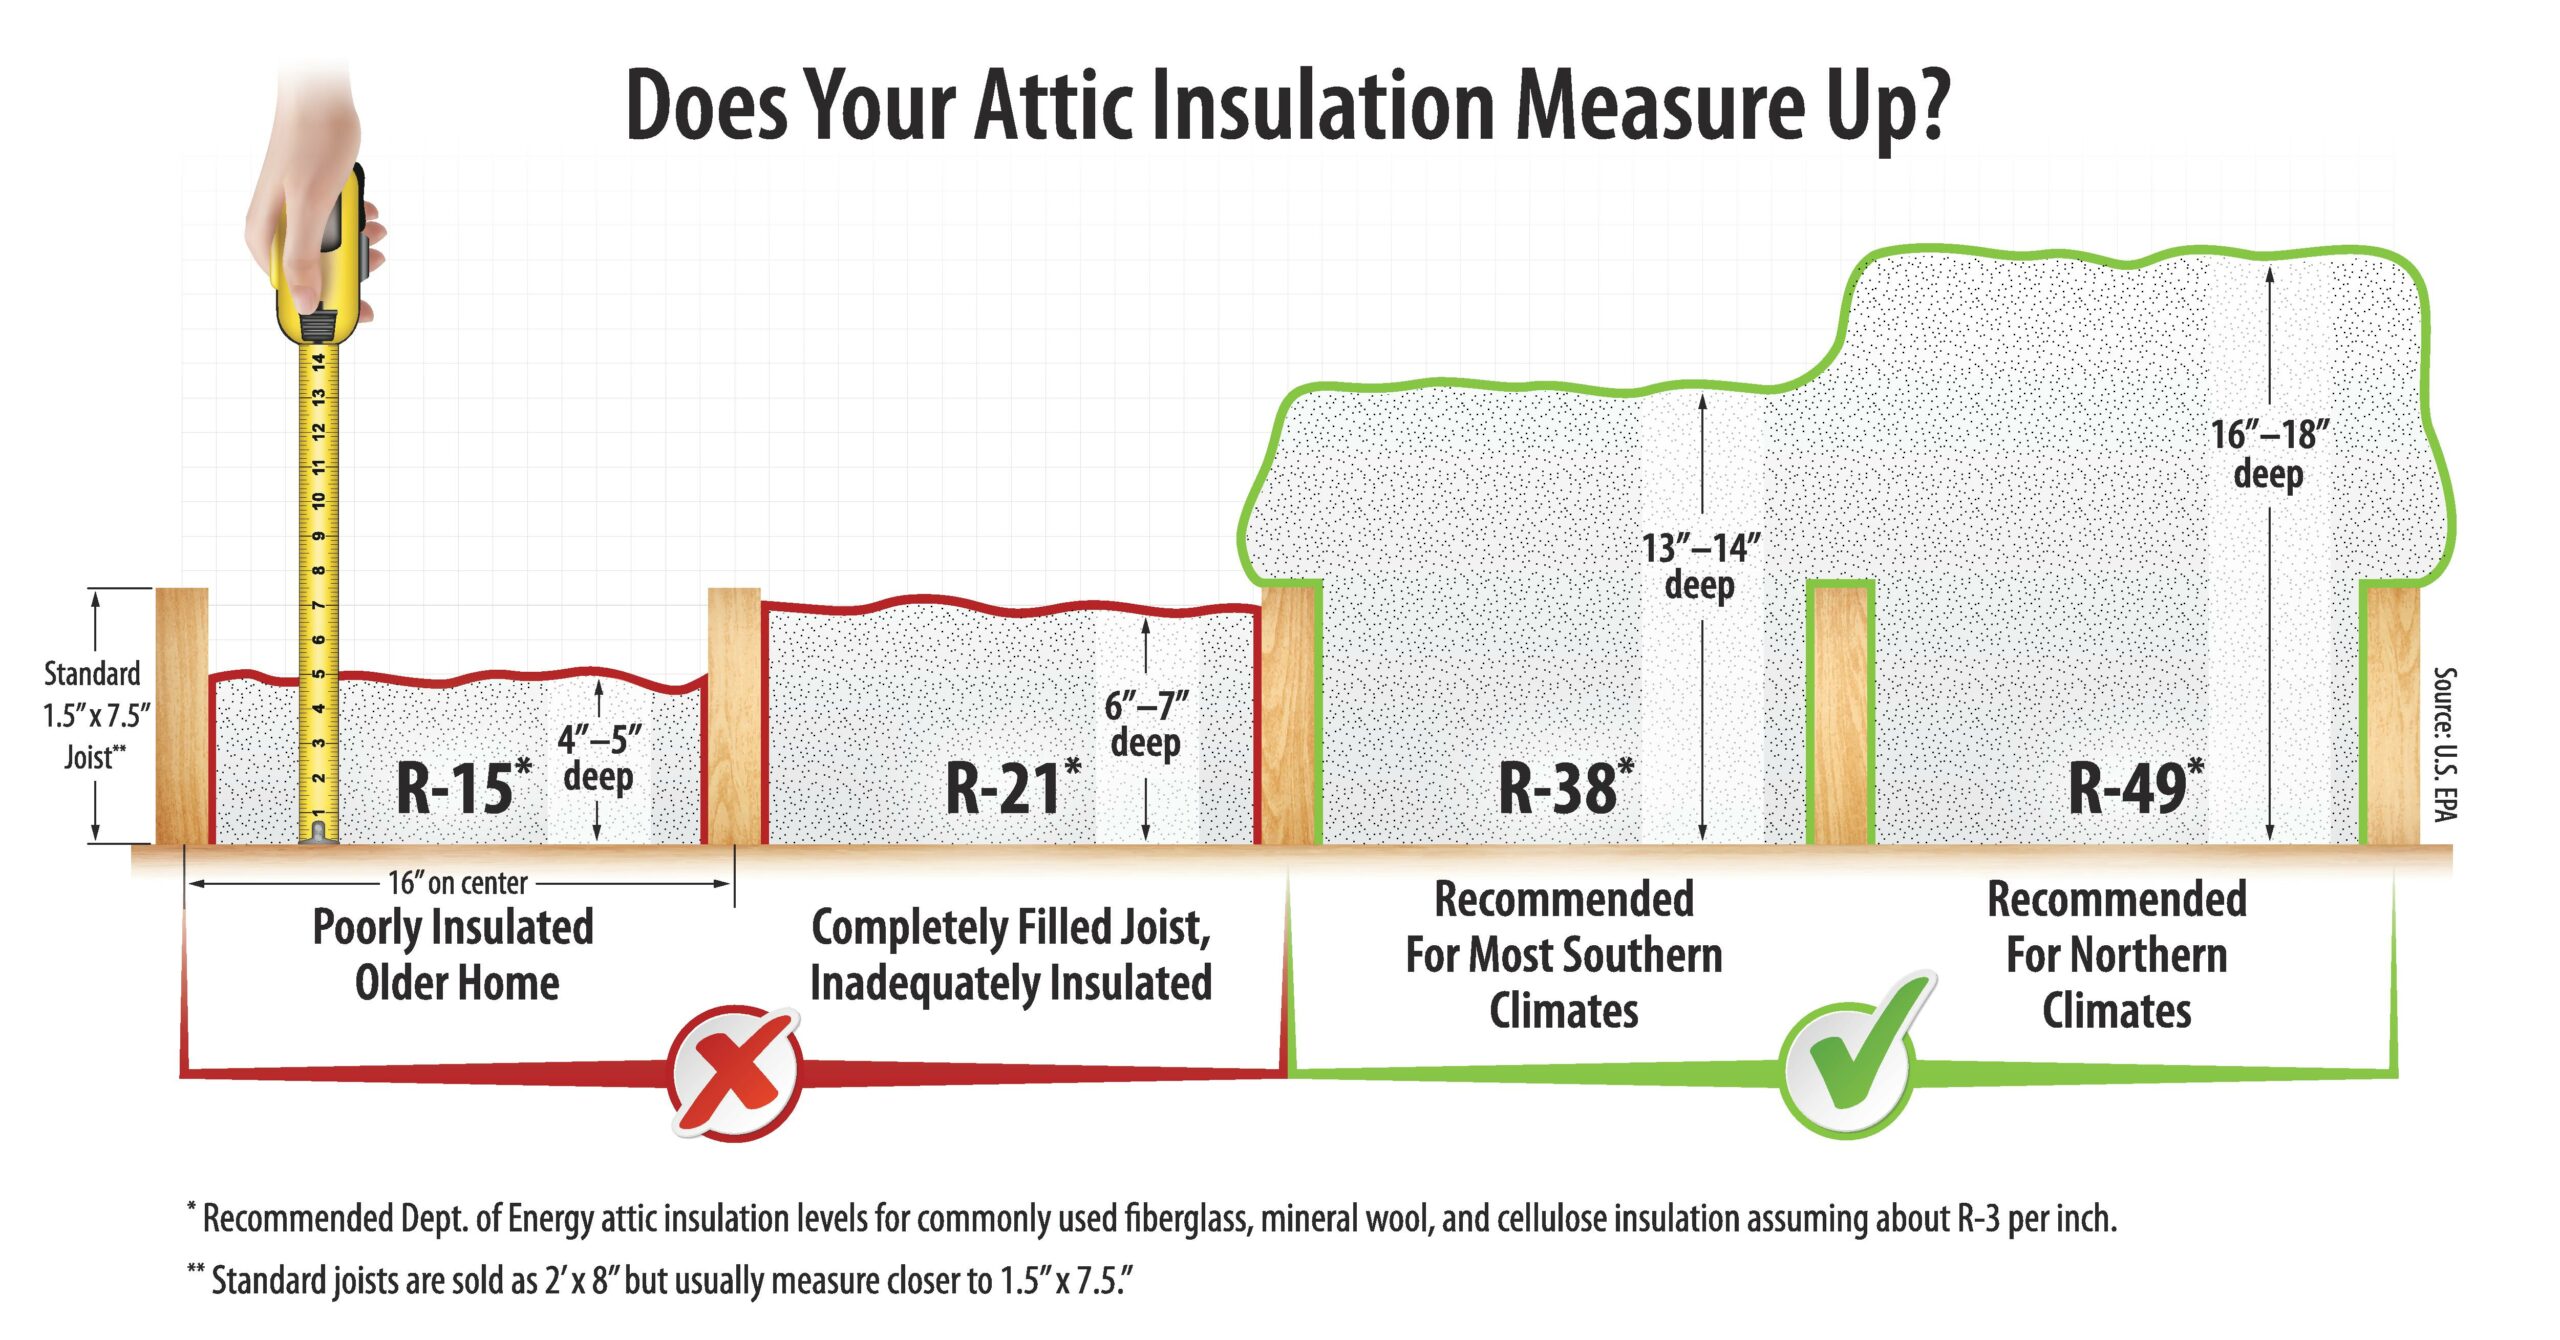 Insulation R-values as recommended by Energy.gov